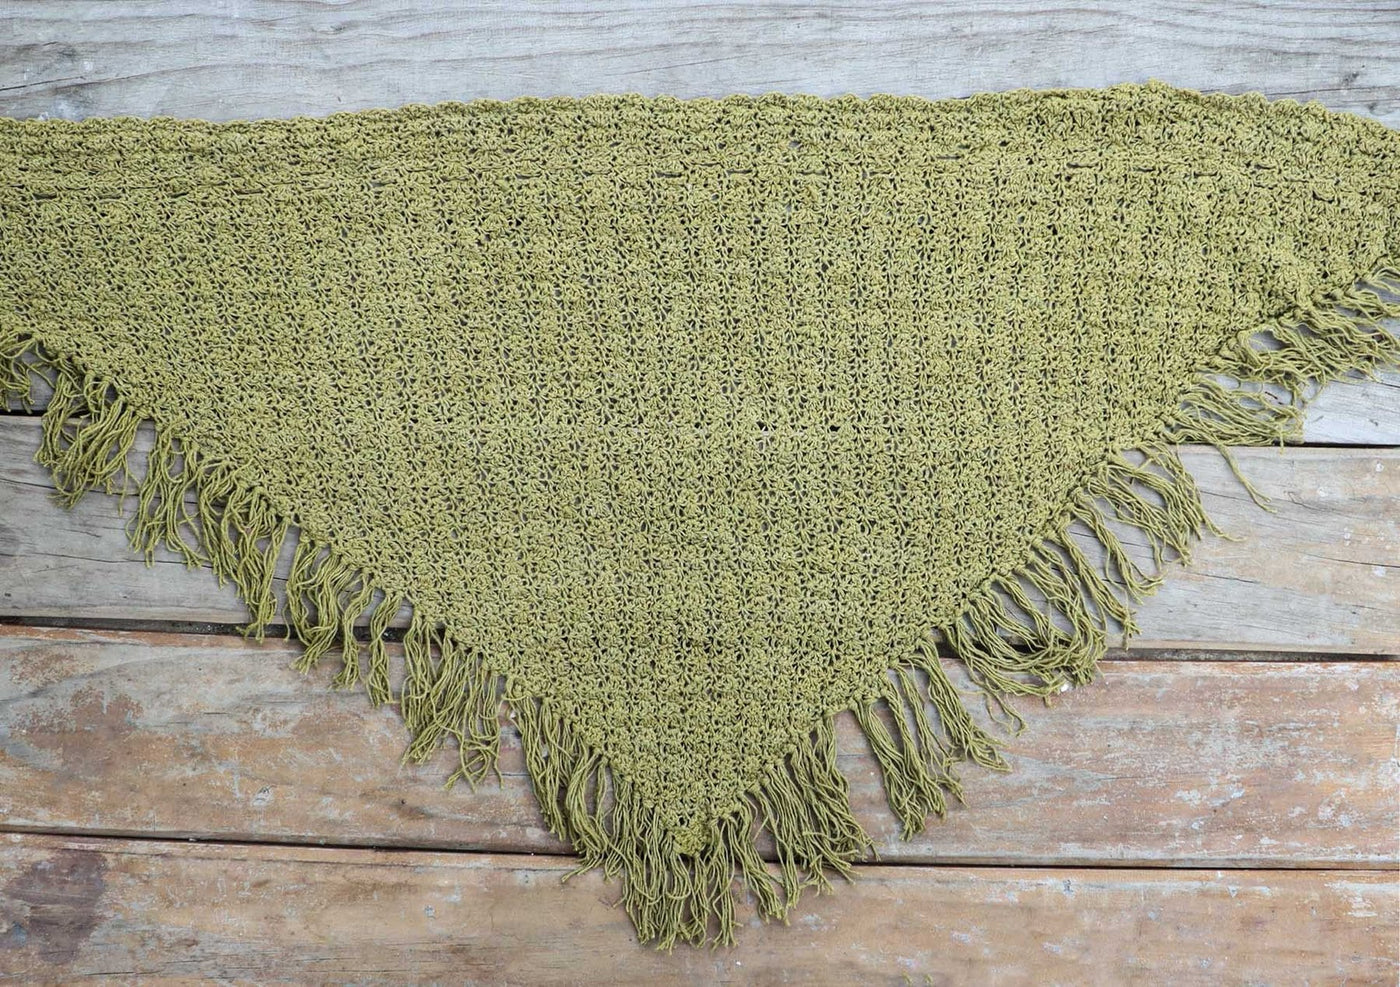 a green knitted silk scarf from eri silk -  Download this beautiful silk knitting pattern online from Muezart